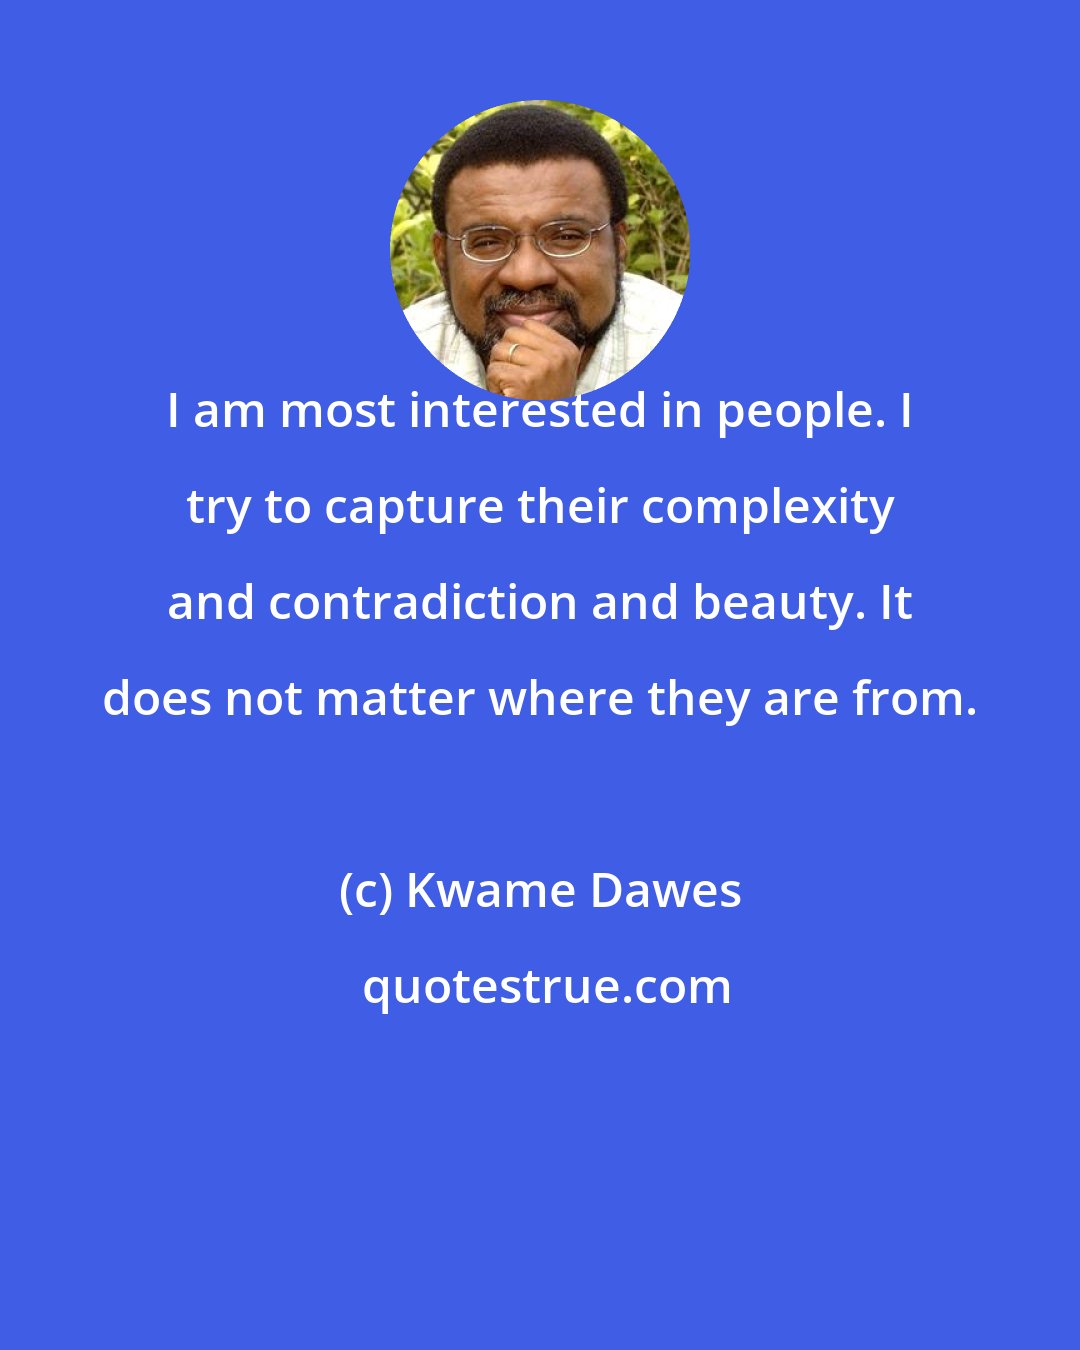 Kwame Dawes: I am most interested in people. I try to capture their complexity and contradiction and beauty. It does not matter where they are from.